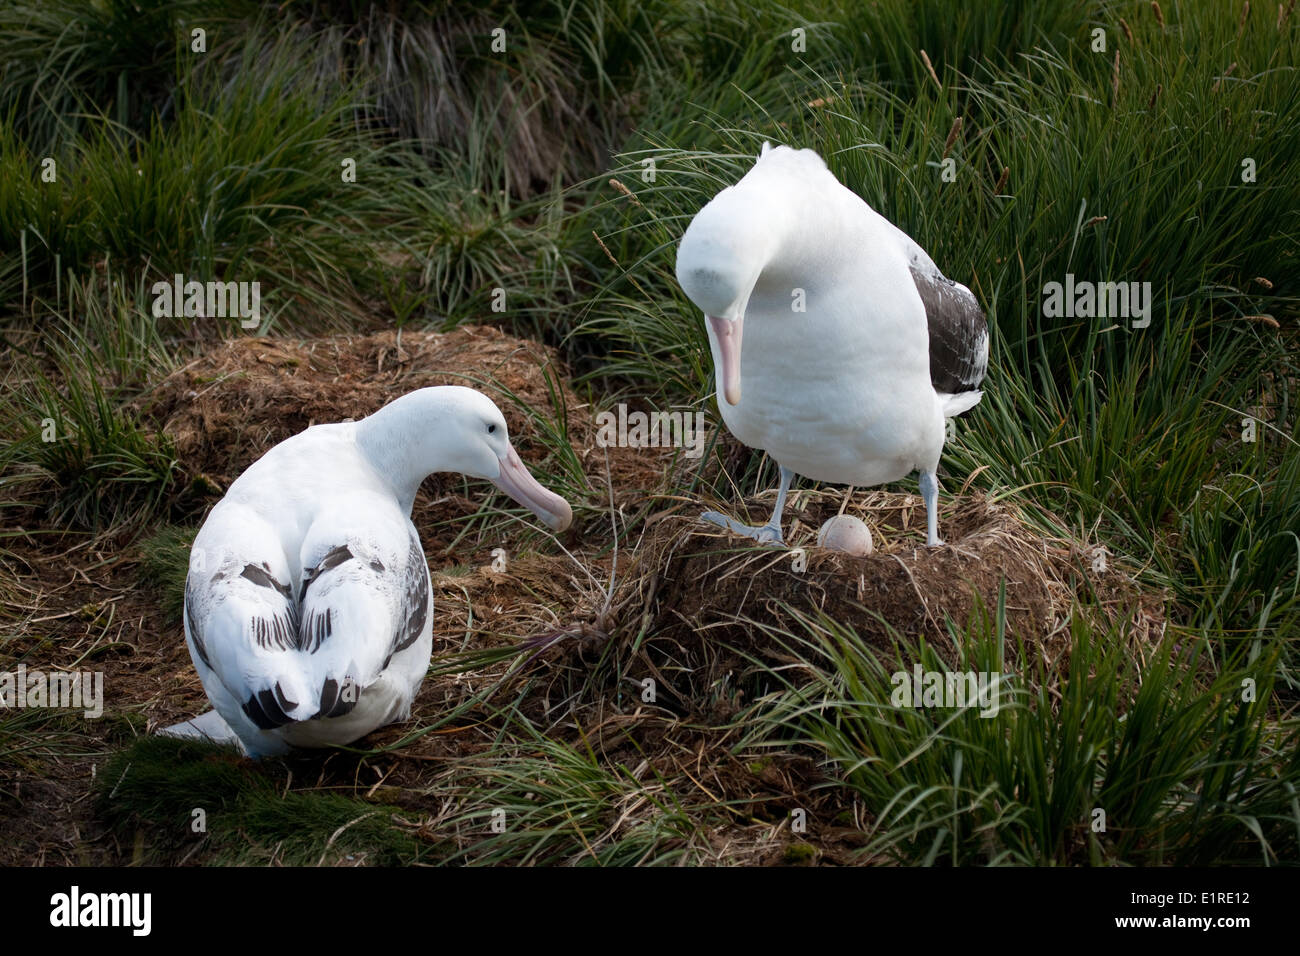 Wandering Albatrosses build their nest of grassy vegetation and soil peat. Incubation takes about 11 weeks and both parents are Stock Photo